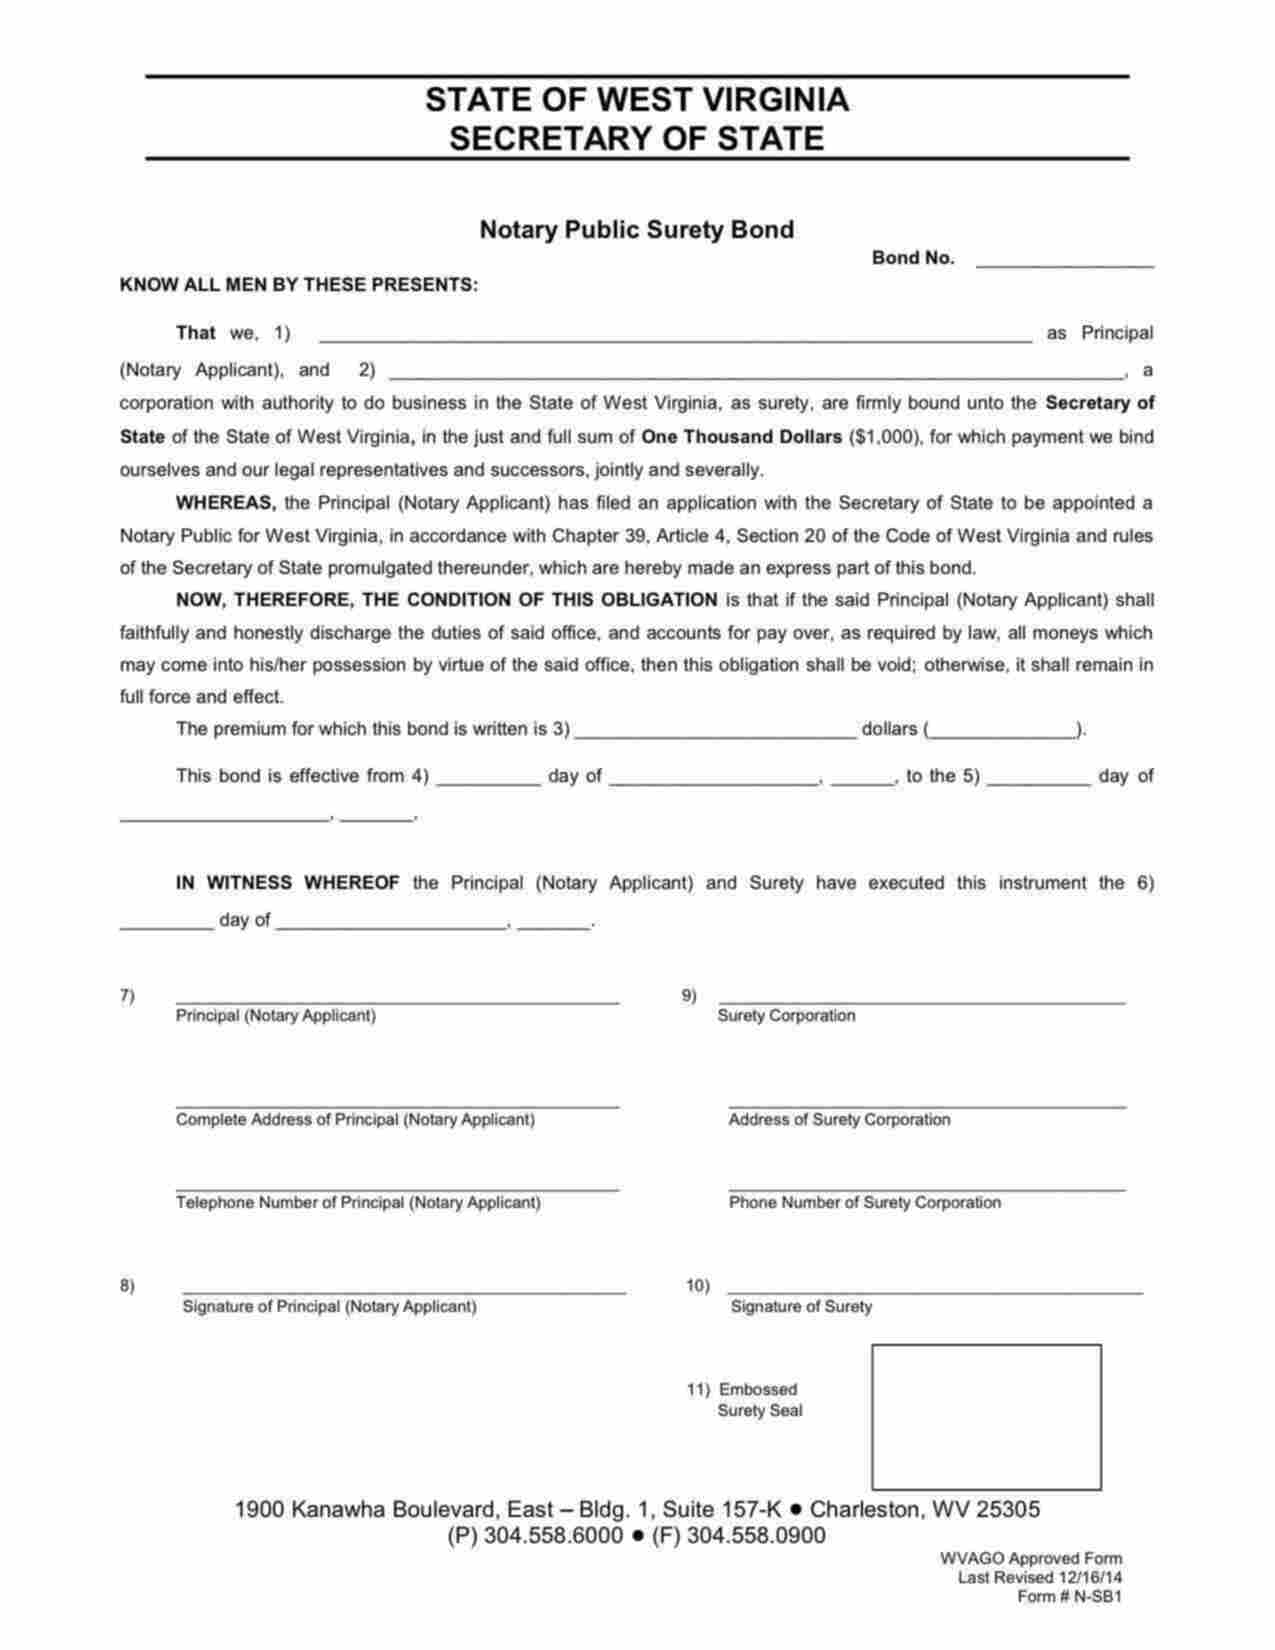 West Virginia Notary Public (No Longer Required) Bond Form